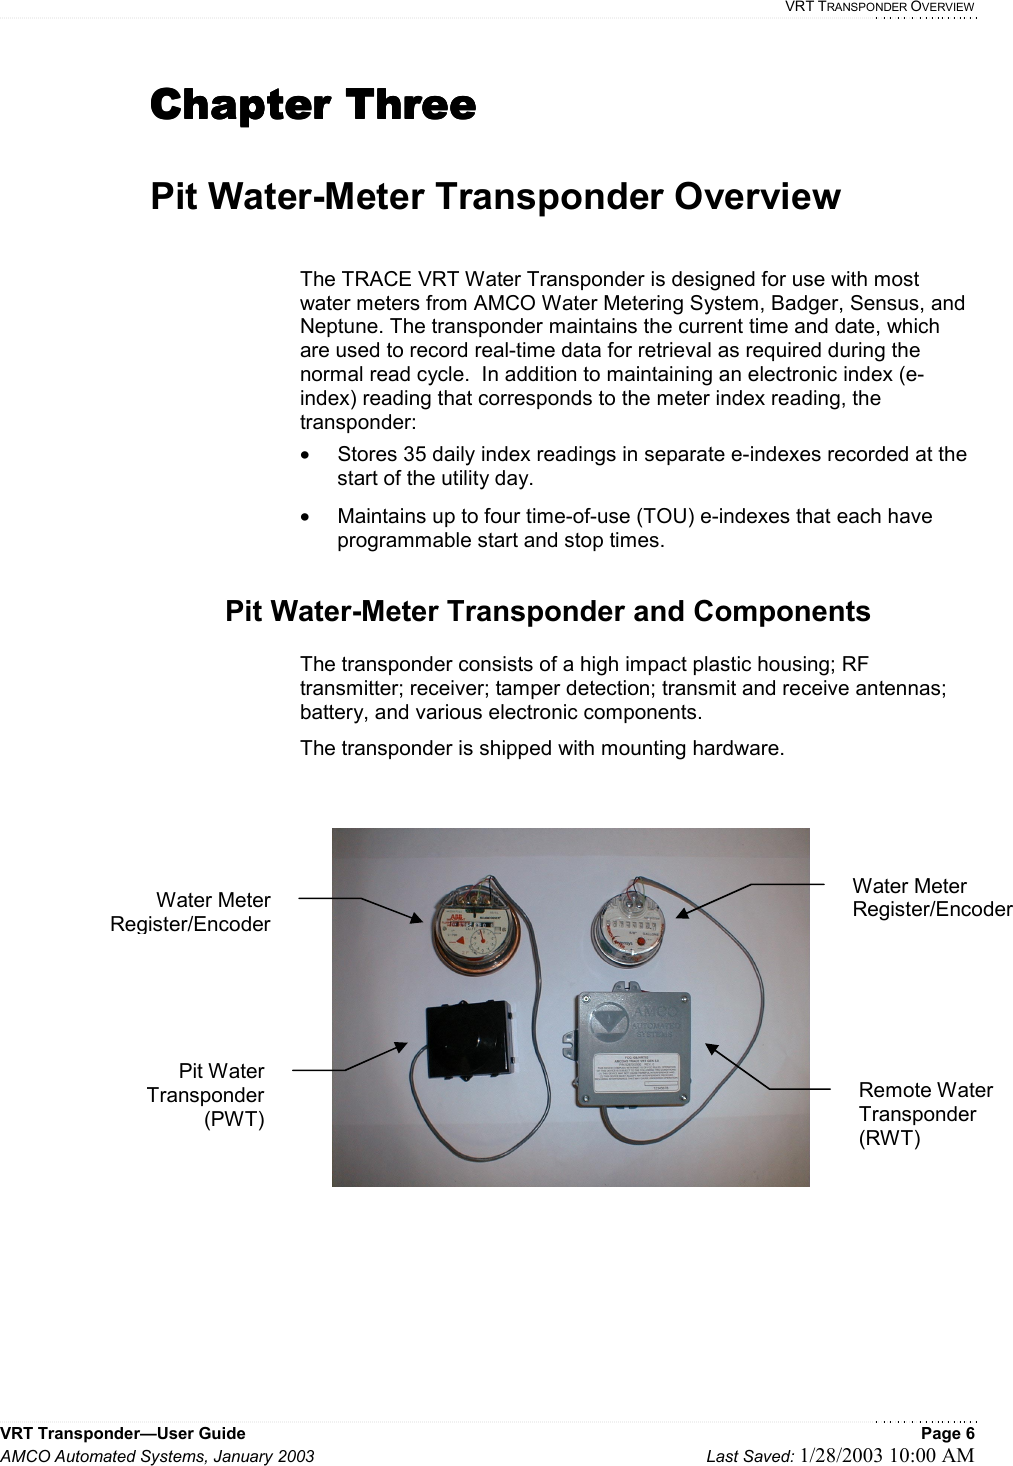   VRT TRANSPONDER OVERVIEW VRT Transponder—User Guide    Page 6 AMCO Automated Systems, January 2003    Last Saved: 1/28/2003 10:00 AM  Chapter ThreeChapter ThreeChapter ThreeChapter Three     Pit Water-Meter Transponder Overview  The TRACE VRT Water Transponder is designed for use with most water meters from AMCO Water Metering System, Badger, Sensus, and Neptune. The transponder maintains the current time and date, which are used to record real-time data for retrieval as required during the normal read cycle.  In addition to maintaining an electronic index (e-index) reading that corresponds to the meter index reading, the transponder: •  Stores 35 daily index readings in separate e-indexes recorded at the start of the utility day. •  Maintains up to four time-of-use (TOU) e-indexes that each have programmable start and stop times.  Pit Water-Meter Transponder and Components  The transponder consists of a high impact plastic housing; RF transmitter; receiver; tamper detection; transmit and receive antennas; battery, and various electronic components.   The transponder is shipped with mounting hardware.    Pit Water Transponder (PWT) Water Meter Register/Encoder Remote Water Transponder (RWT) Water Meter Register/Encoder 